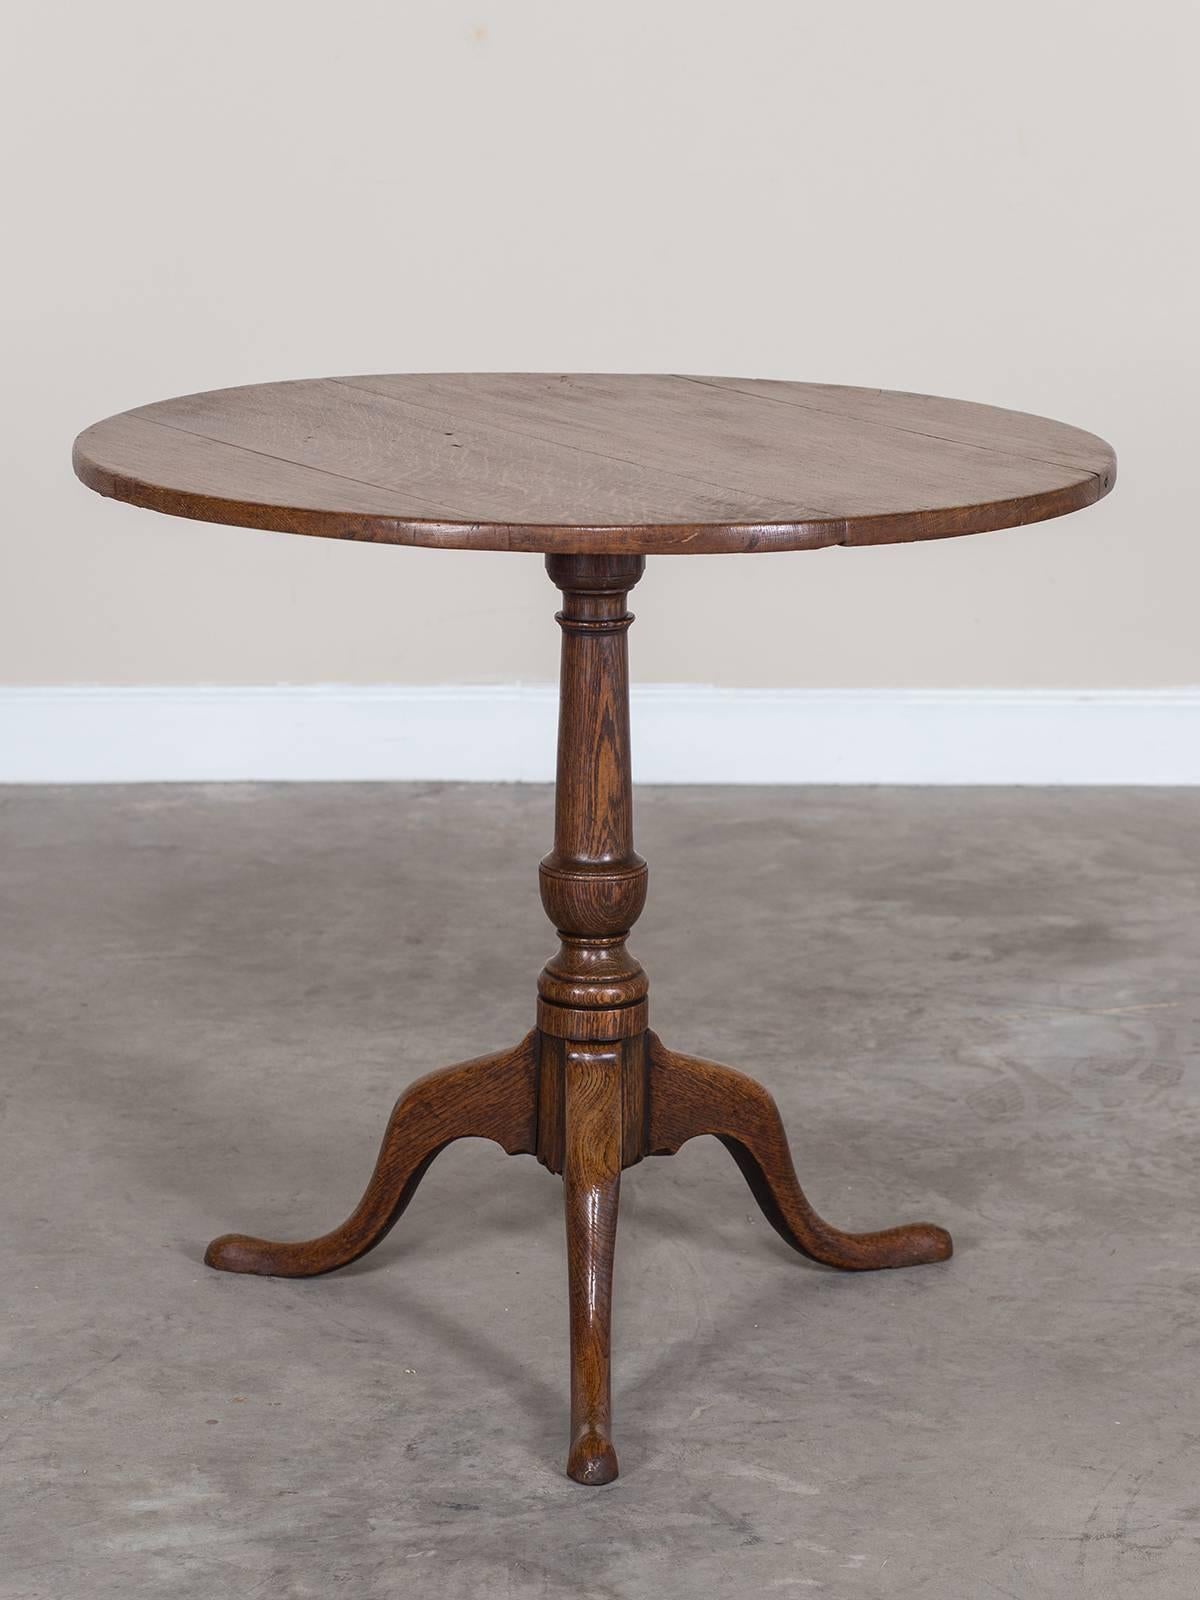 Be the first to see our new arrivals directly through 1stdibs! Please click Follow Dealer below. 

The clean elegant lines of this antique English George III period oak tilt top table circa 1790 showcase the elegance created during the Georgian